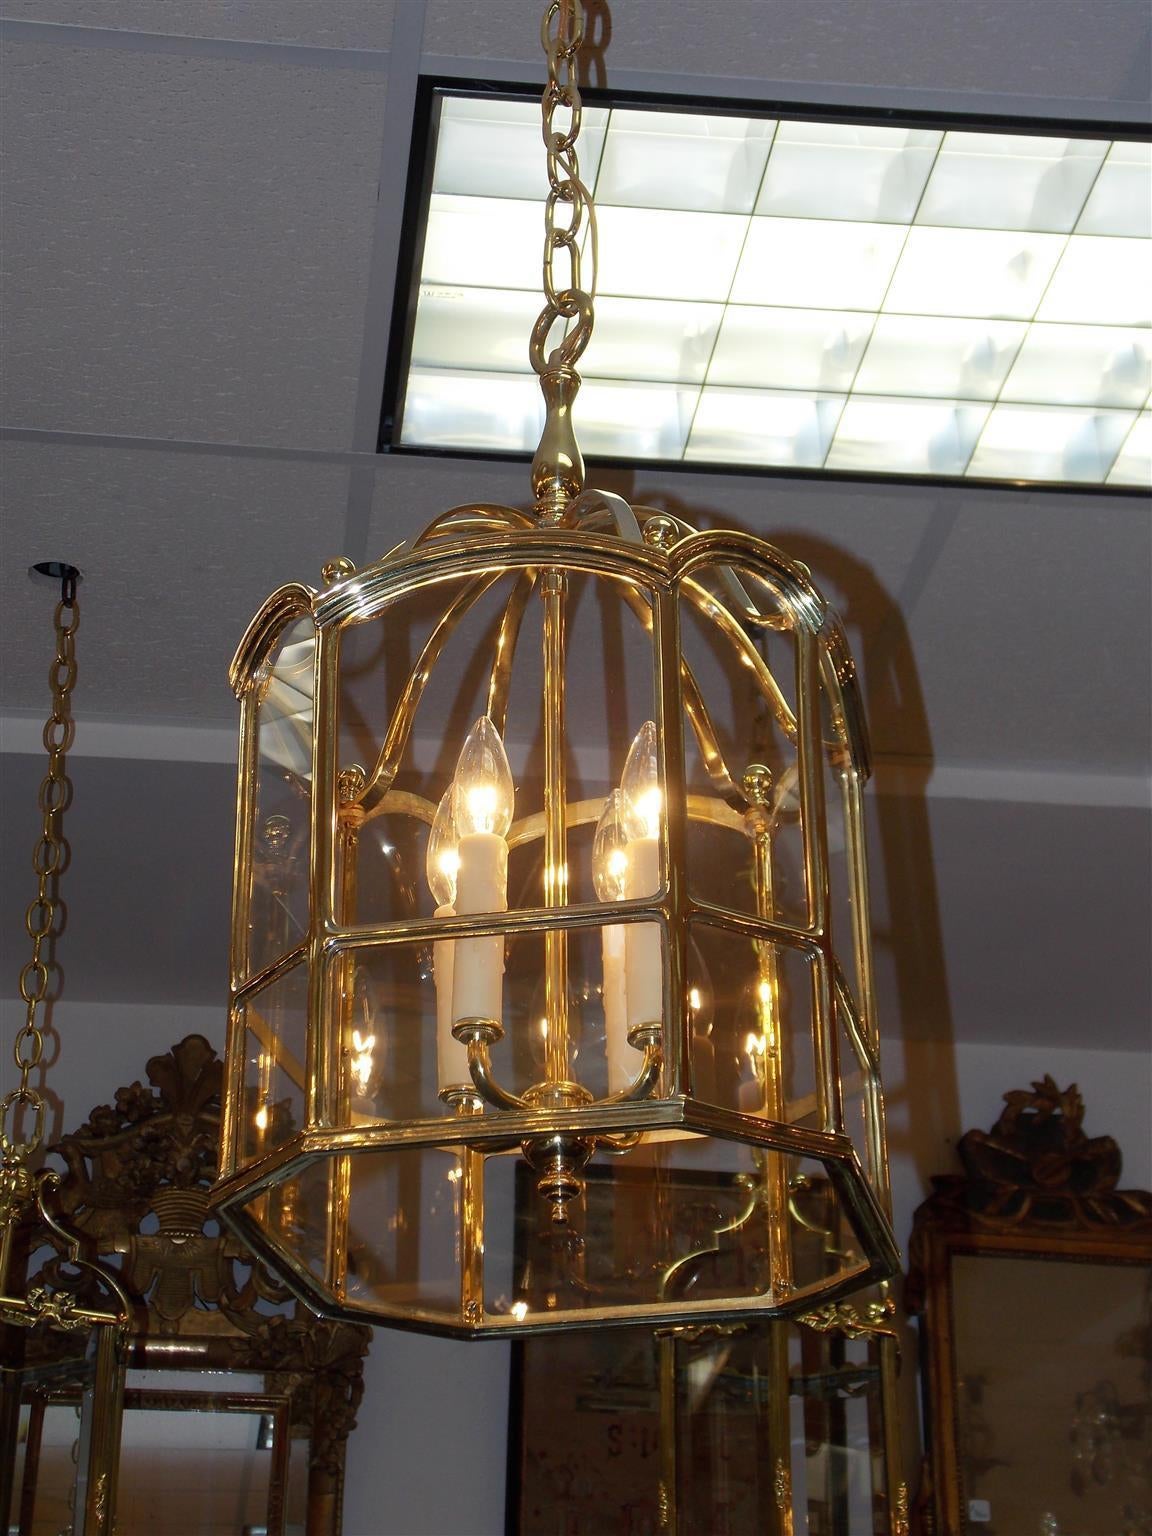 American brass four-light octagonal shaped hanging glass lantern with centered supporting ring, scrolled arms, ball finials, and terminating on a beveled molded edge, Mid-19th century.